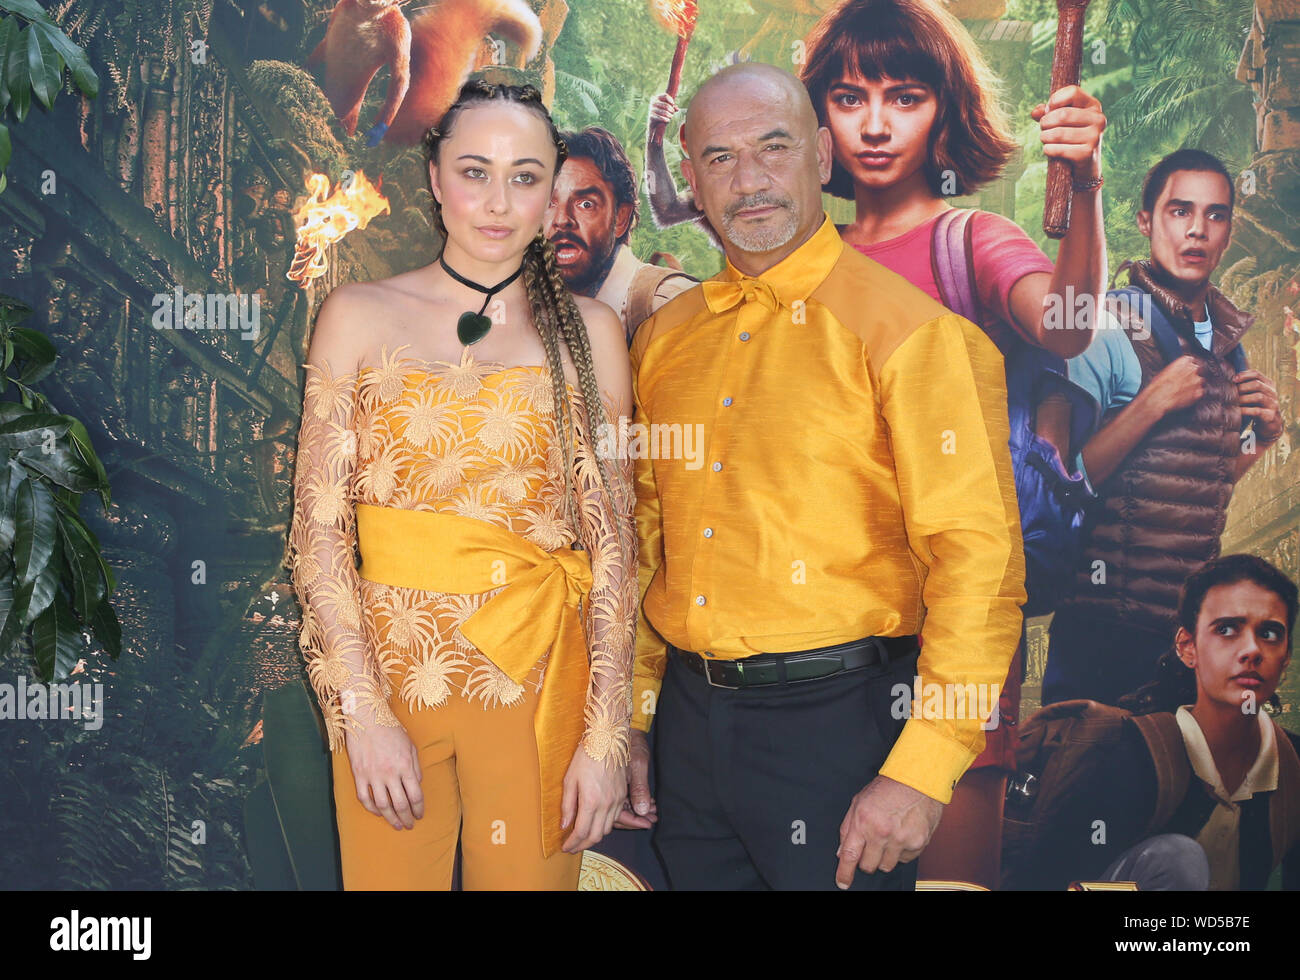 la-premiere-of-paramount-pictures-dora-and-the-lost-city-of-gold-featuring-temuera-morrison-guest-where-los-angeles-california-united-states-when-29-jul-2019-credit-fayesvisionwenncom-WD5B7E.jpg